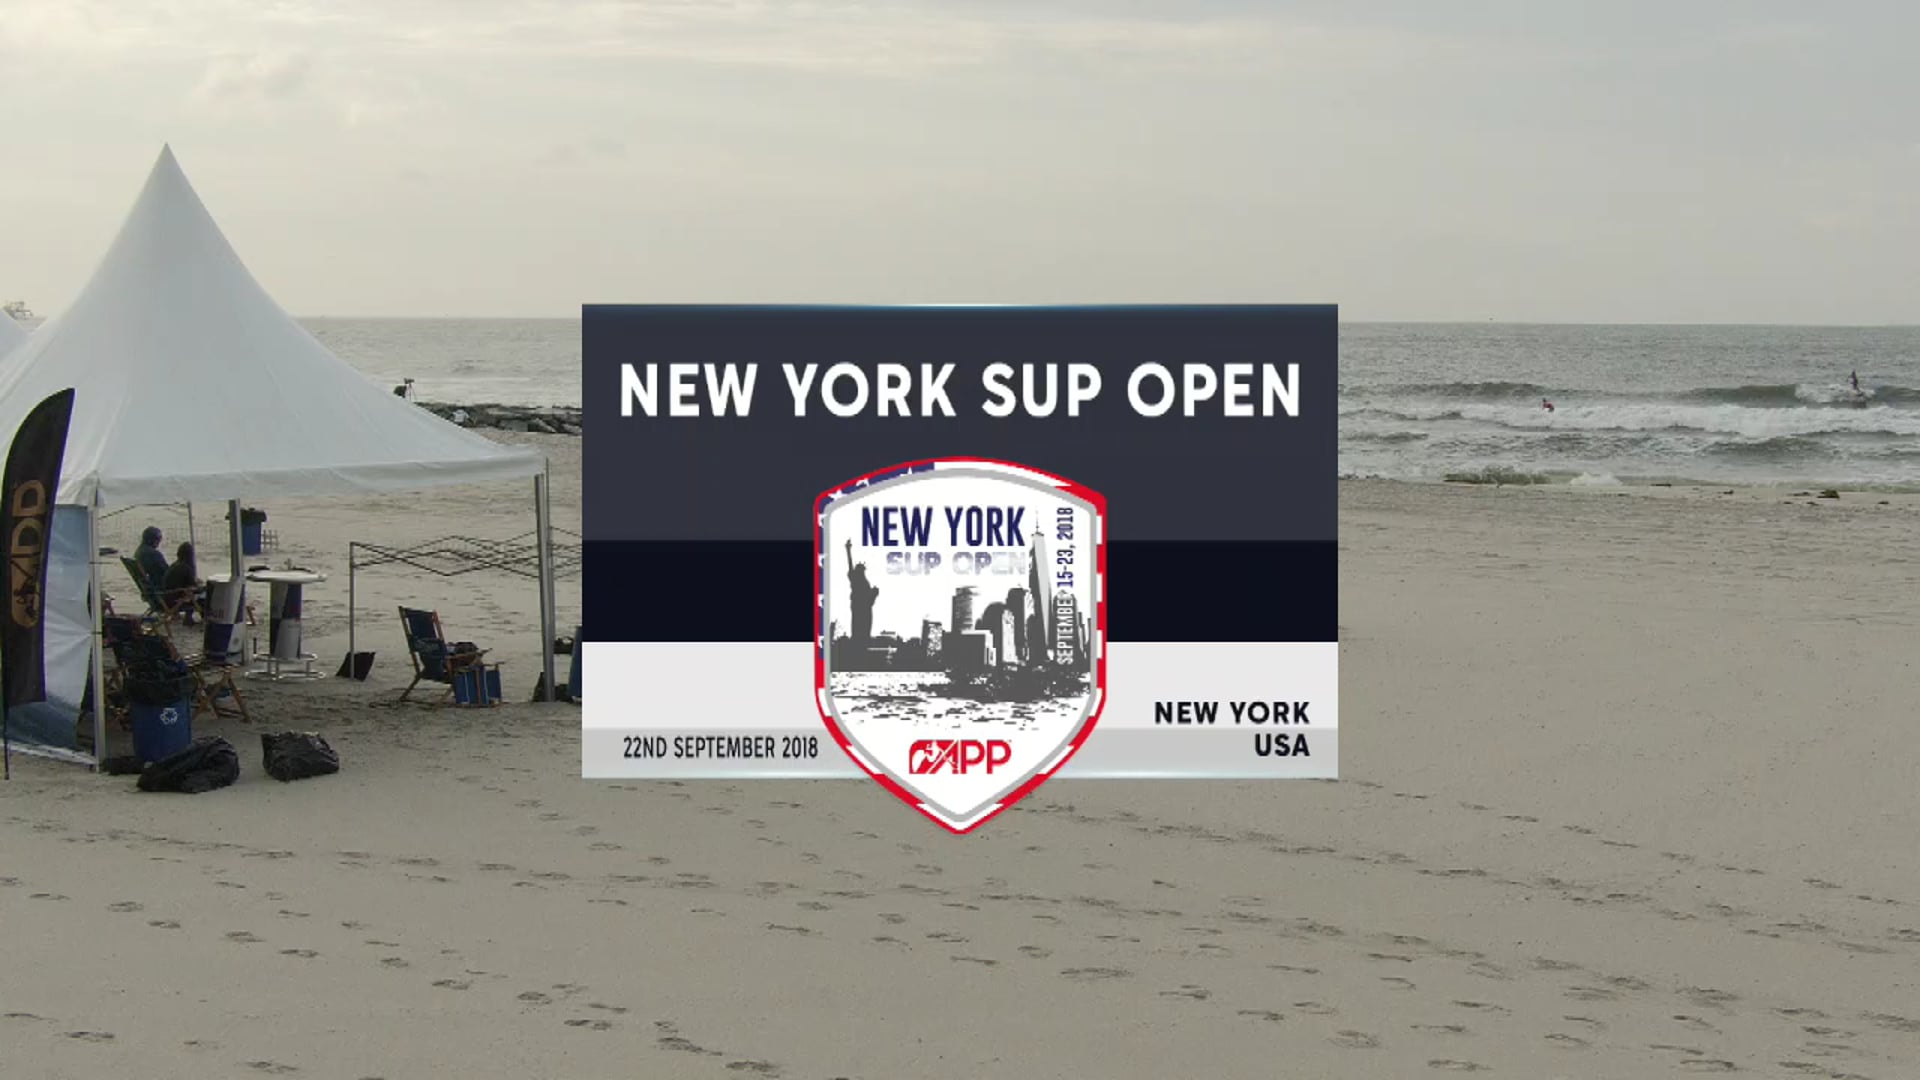 NY SUP OPEN - Sup Surf Day 4 Live 2018